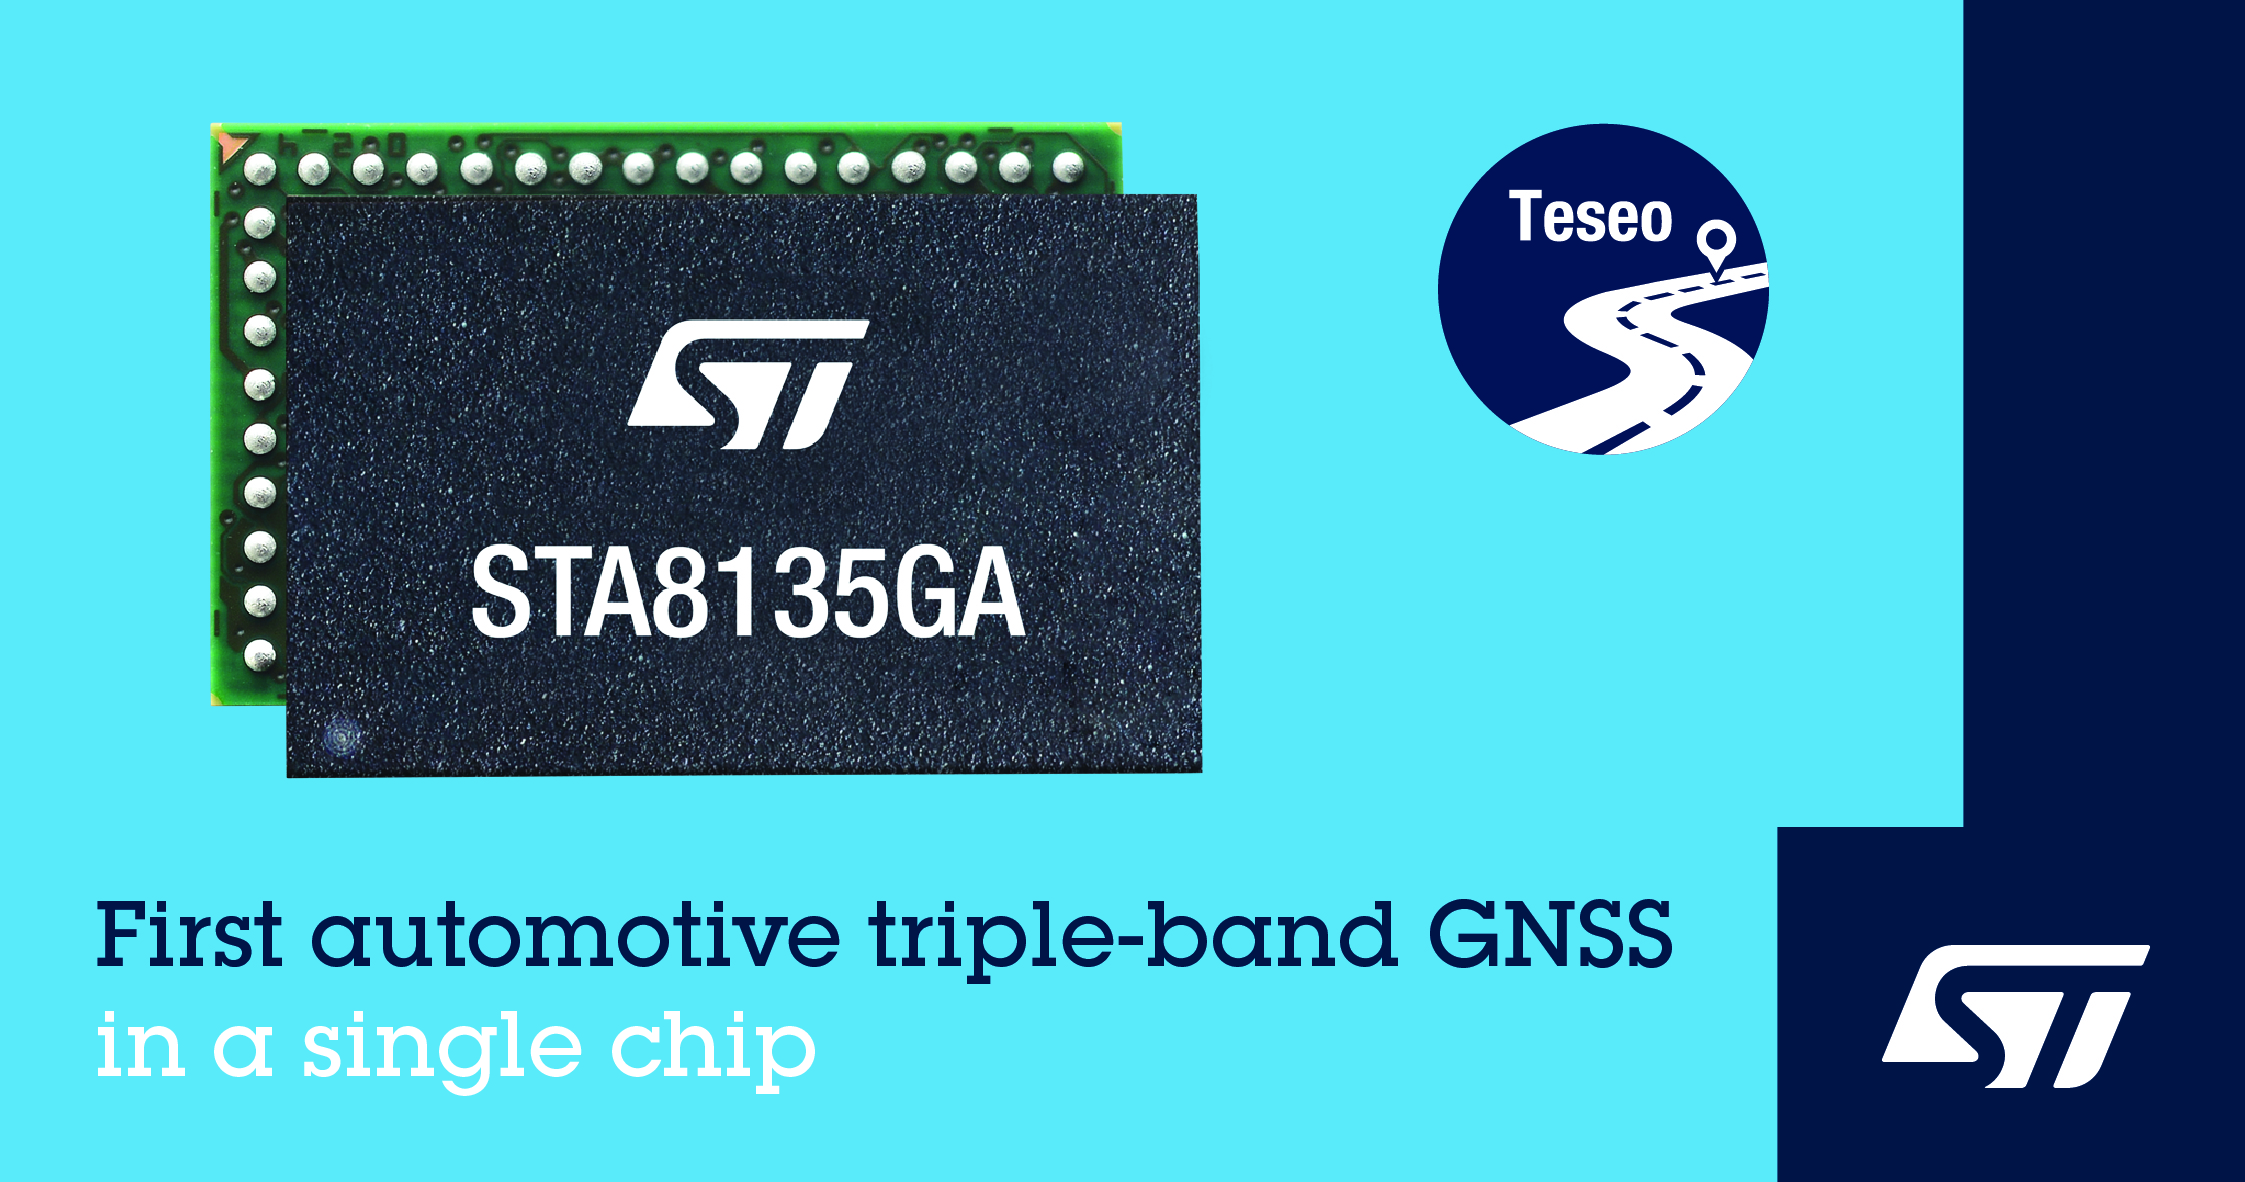 STMicroelectronics monolithic tri-band satellite navigation receiver improves car positioning accuracy